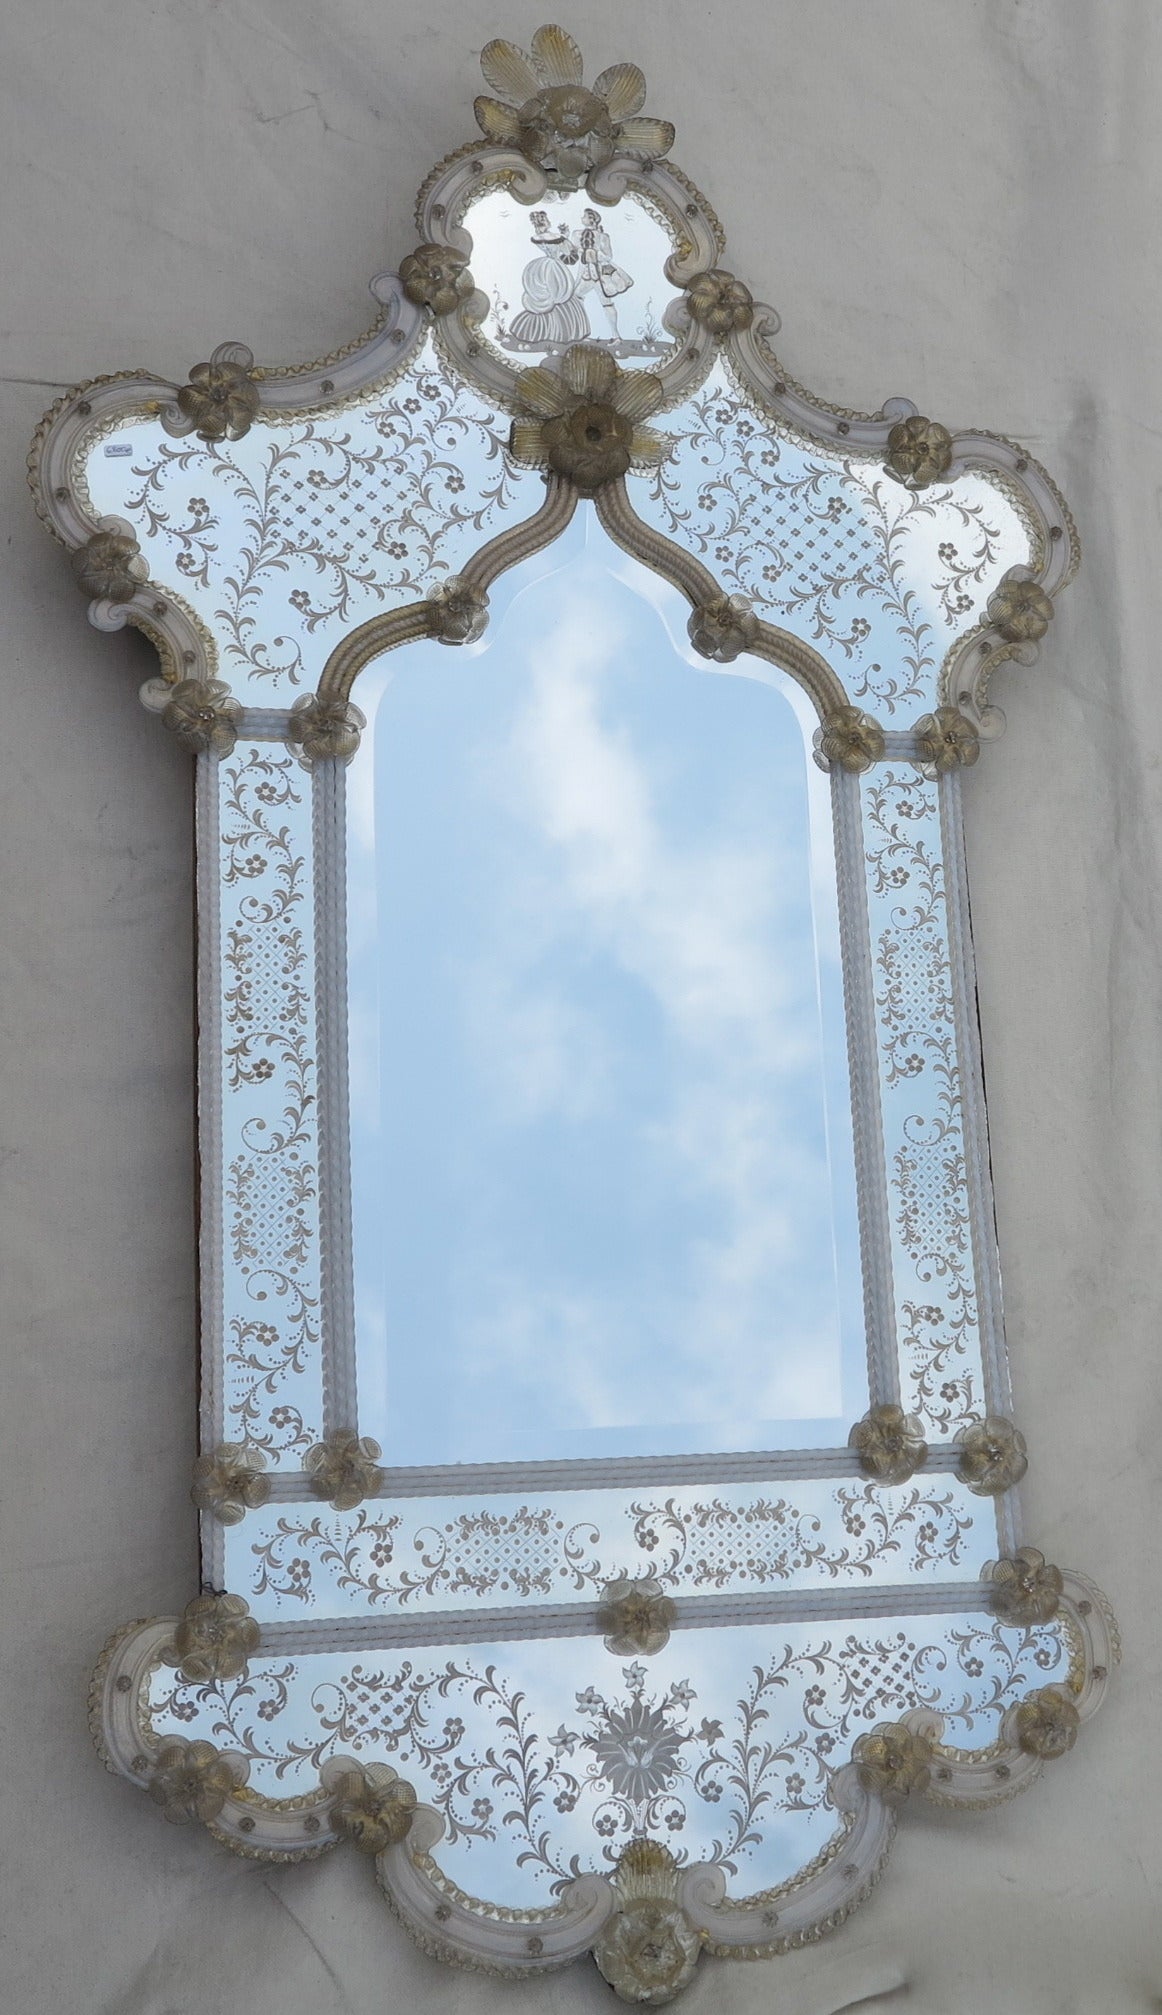 Mirror Murano has parecloses engraved by flowers and characters on the front wall, woman has flowers and gentleman and birds in the sky, ornament of flowers, leaves gilded with gold and méandres and twist opalescent. Good conditions, circa 1950,